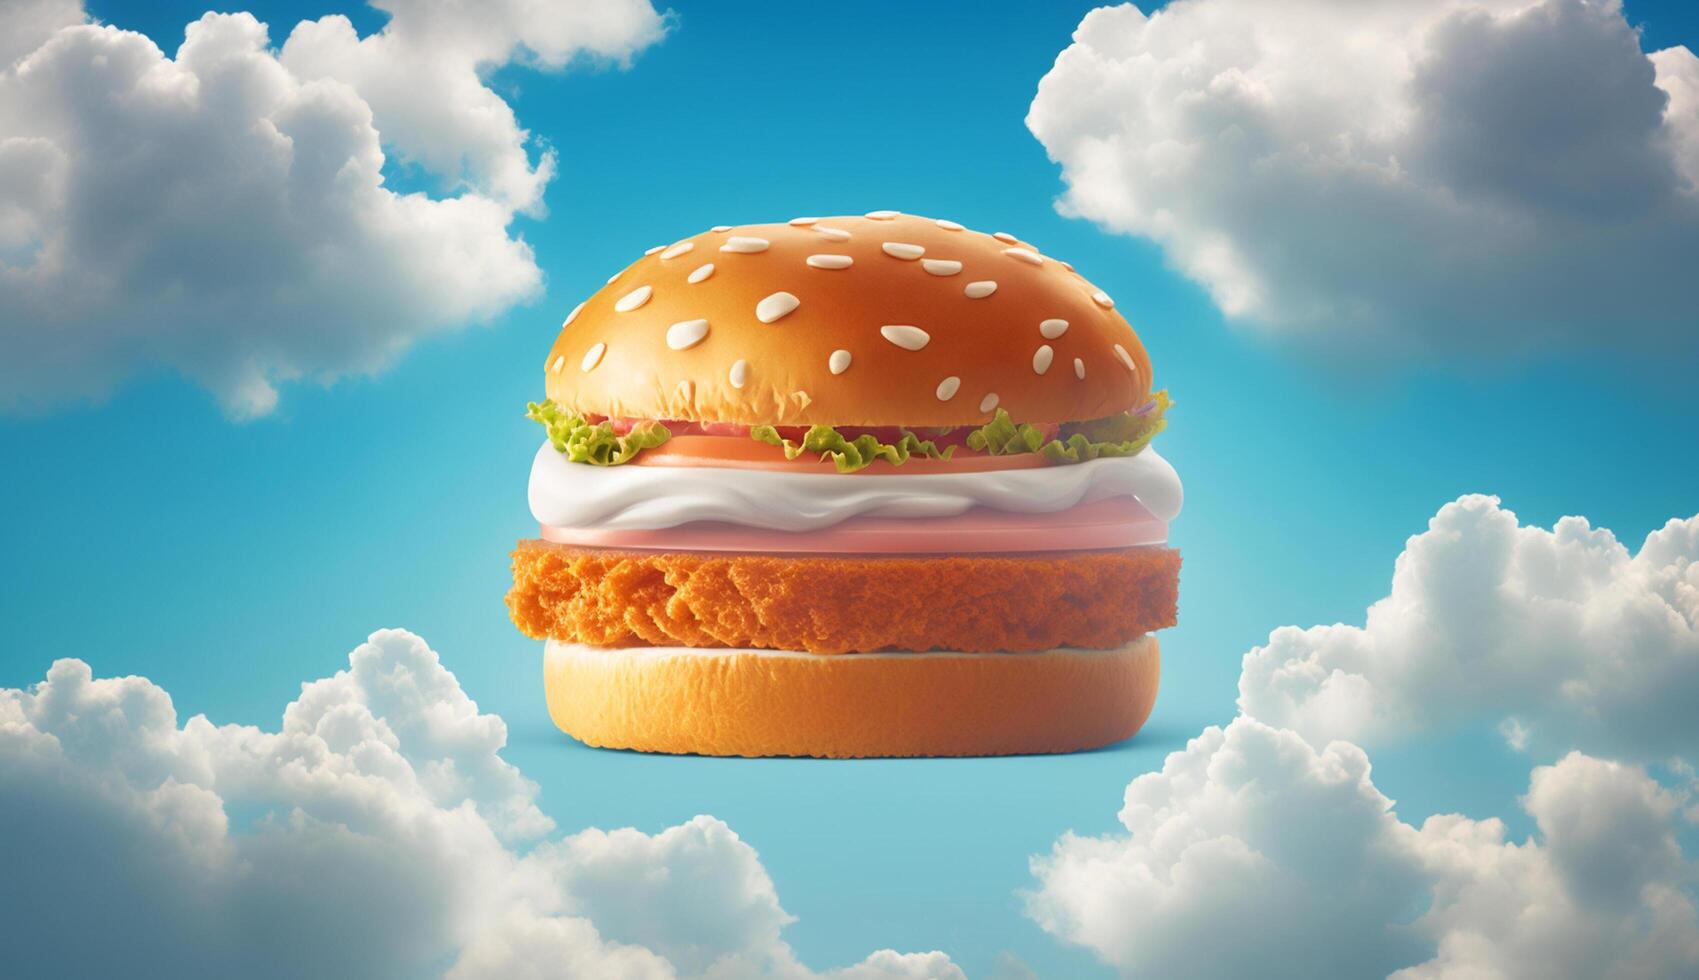 Hamburger with clouds in the sky, photo